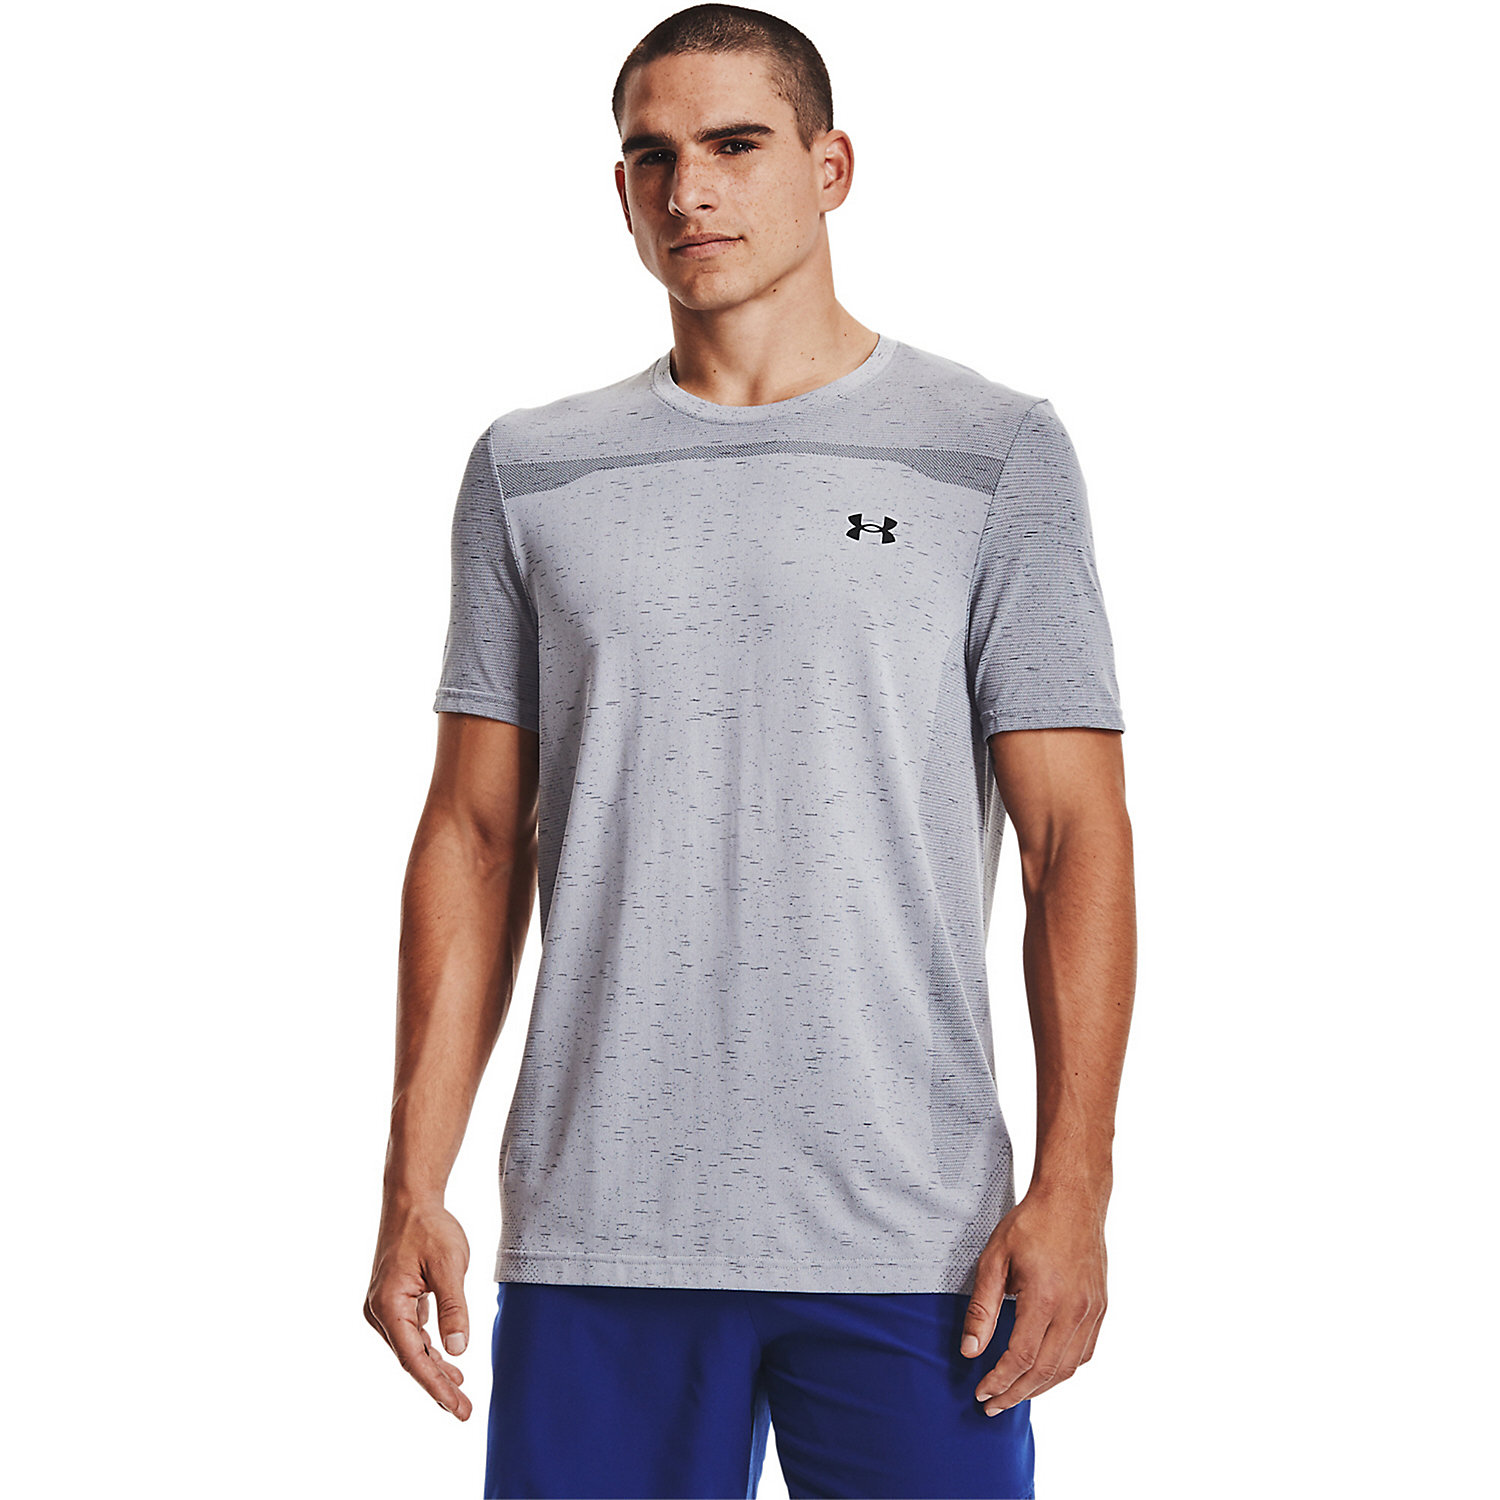 Under Armour Mens Seamless SS Top